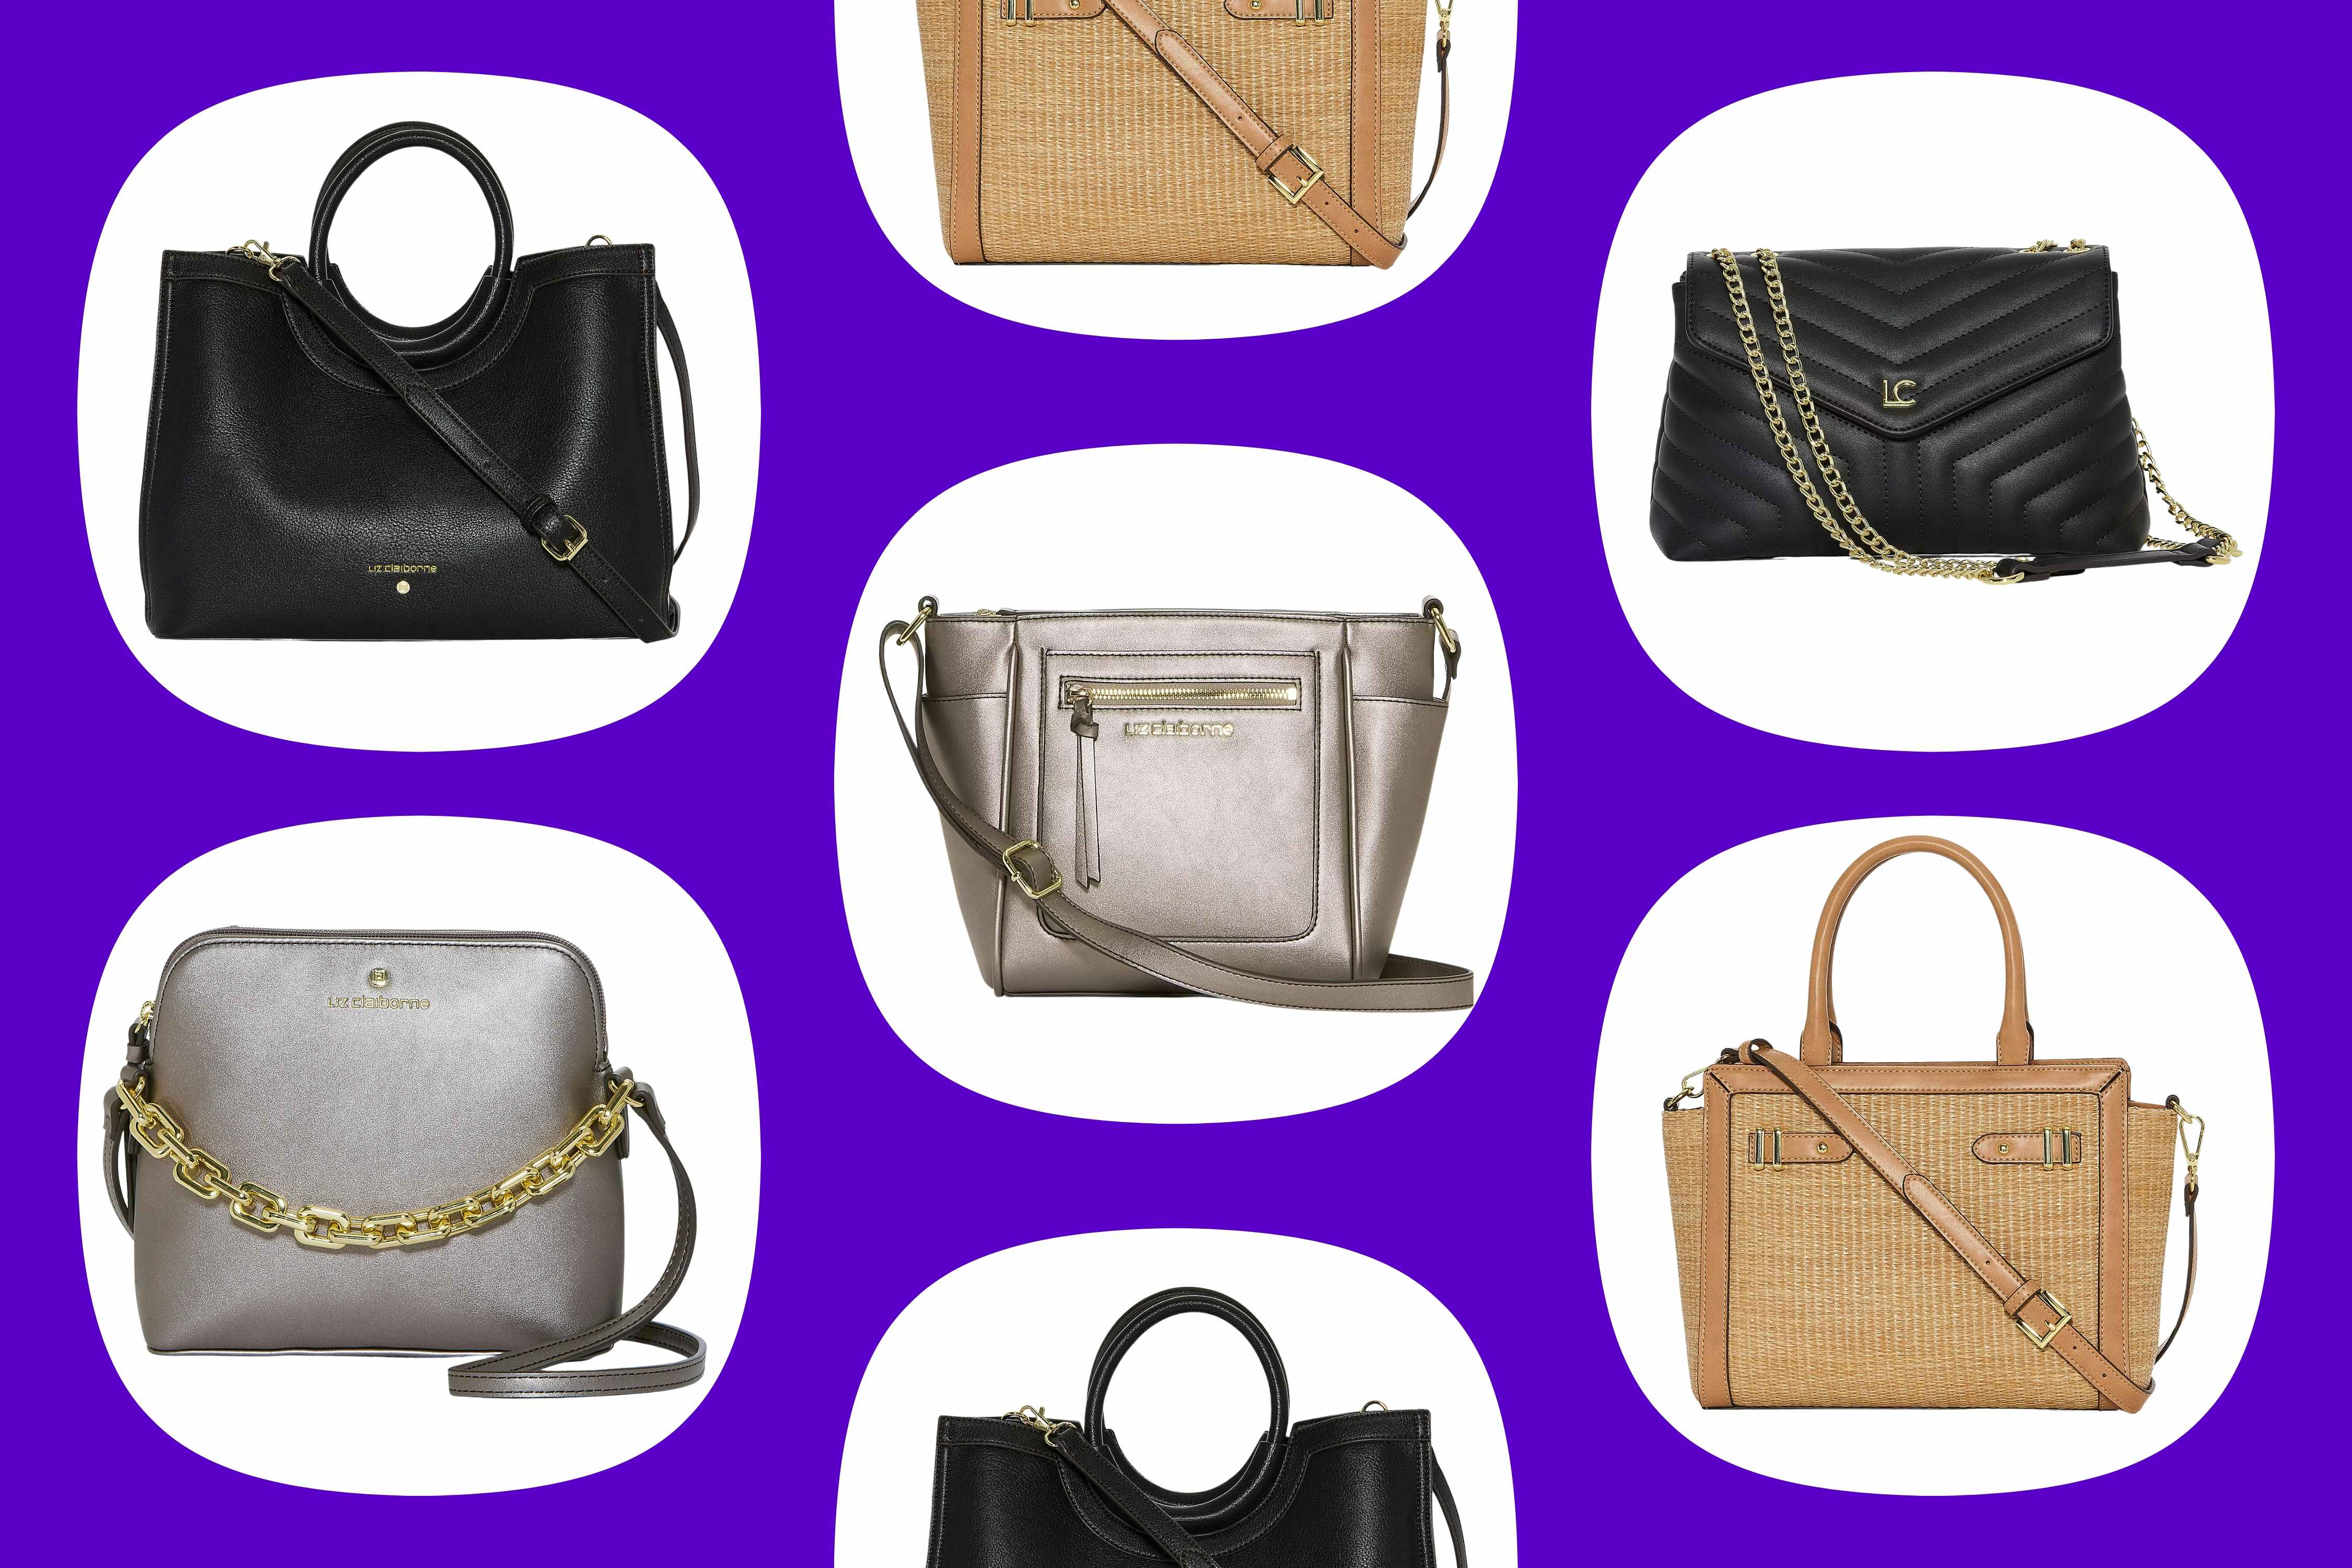 Clearance Handbags at JCPenney — Prices Starting at Just $18